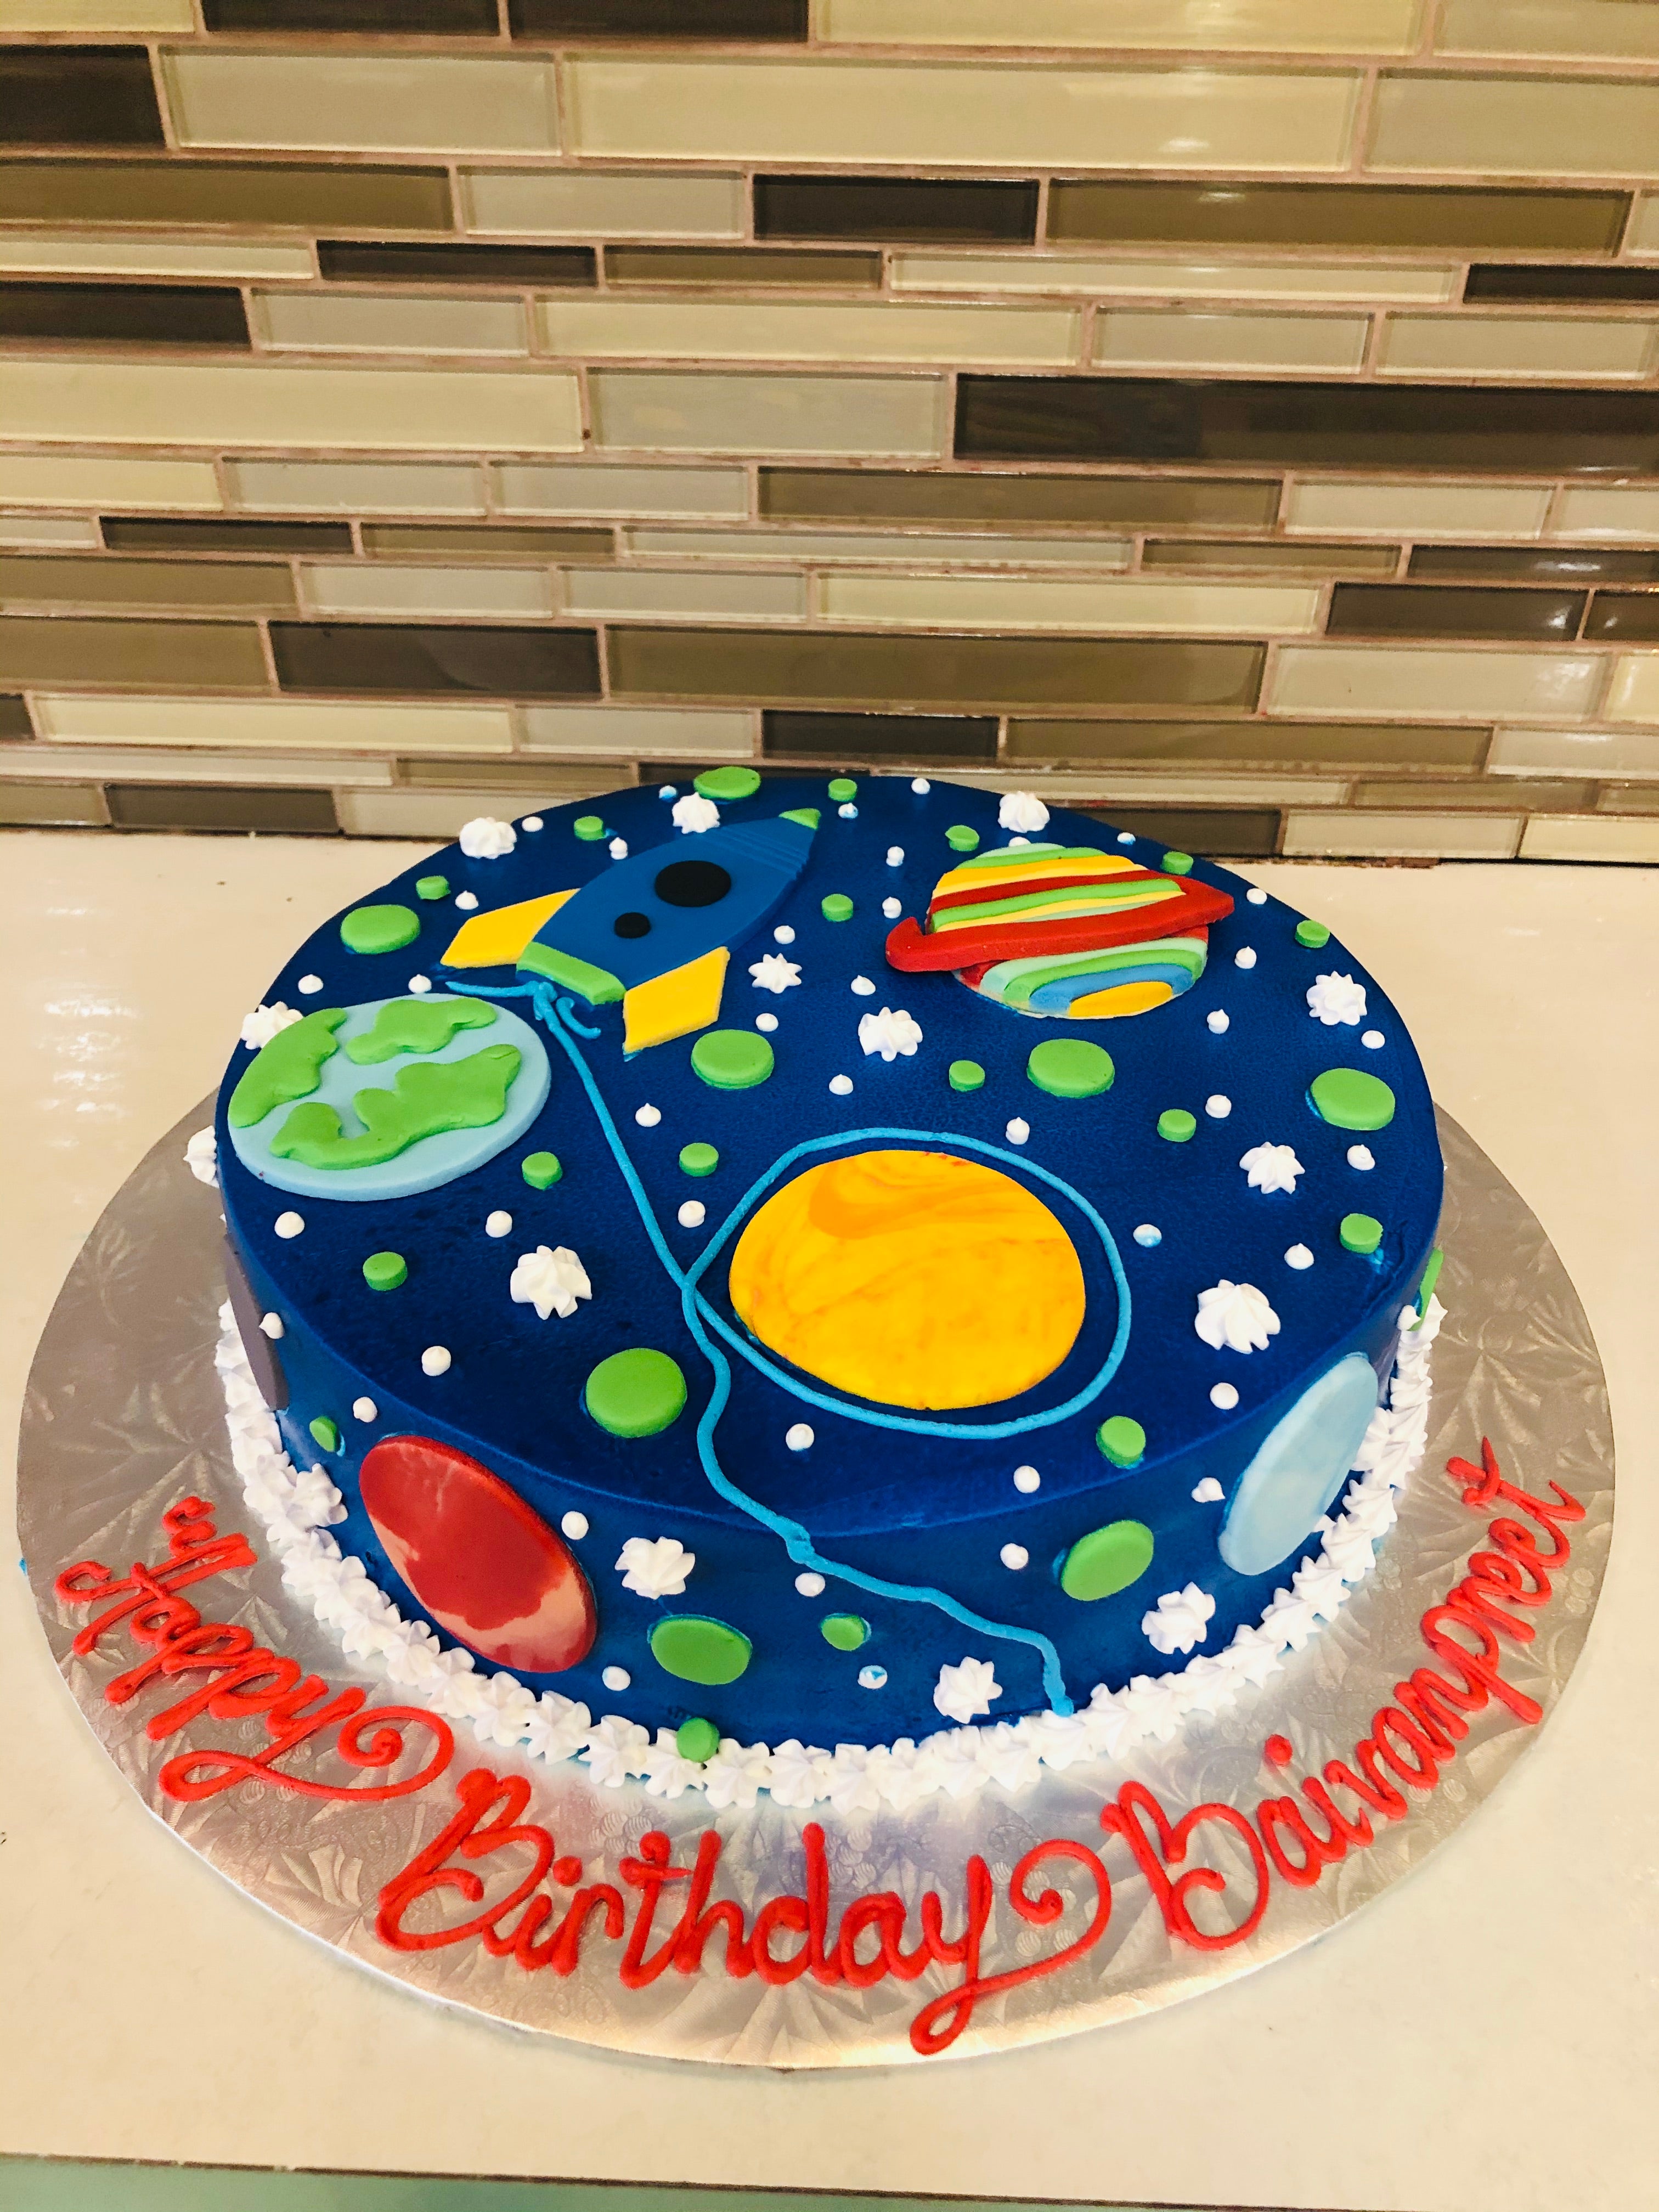 A Cake that is out of this World!